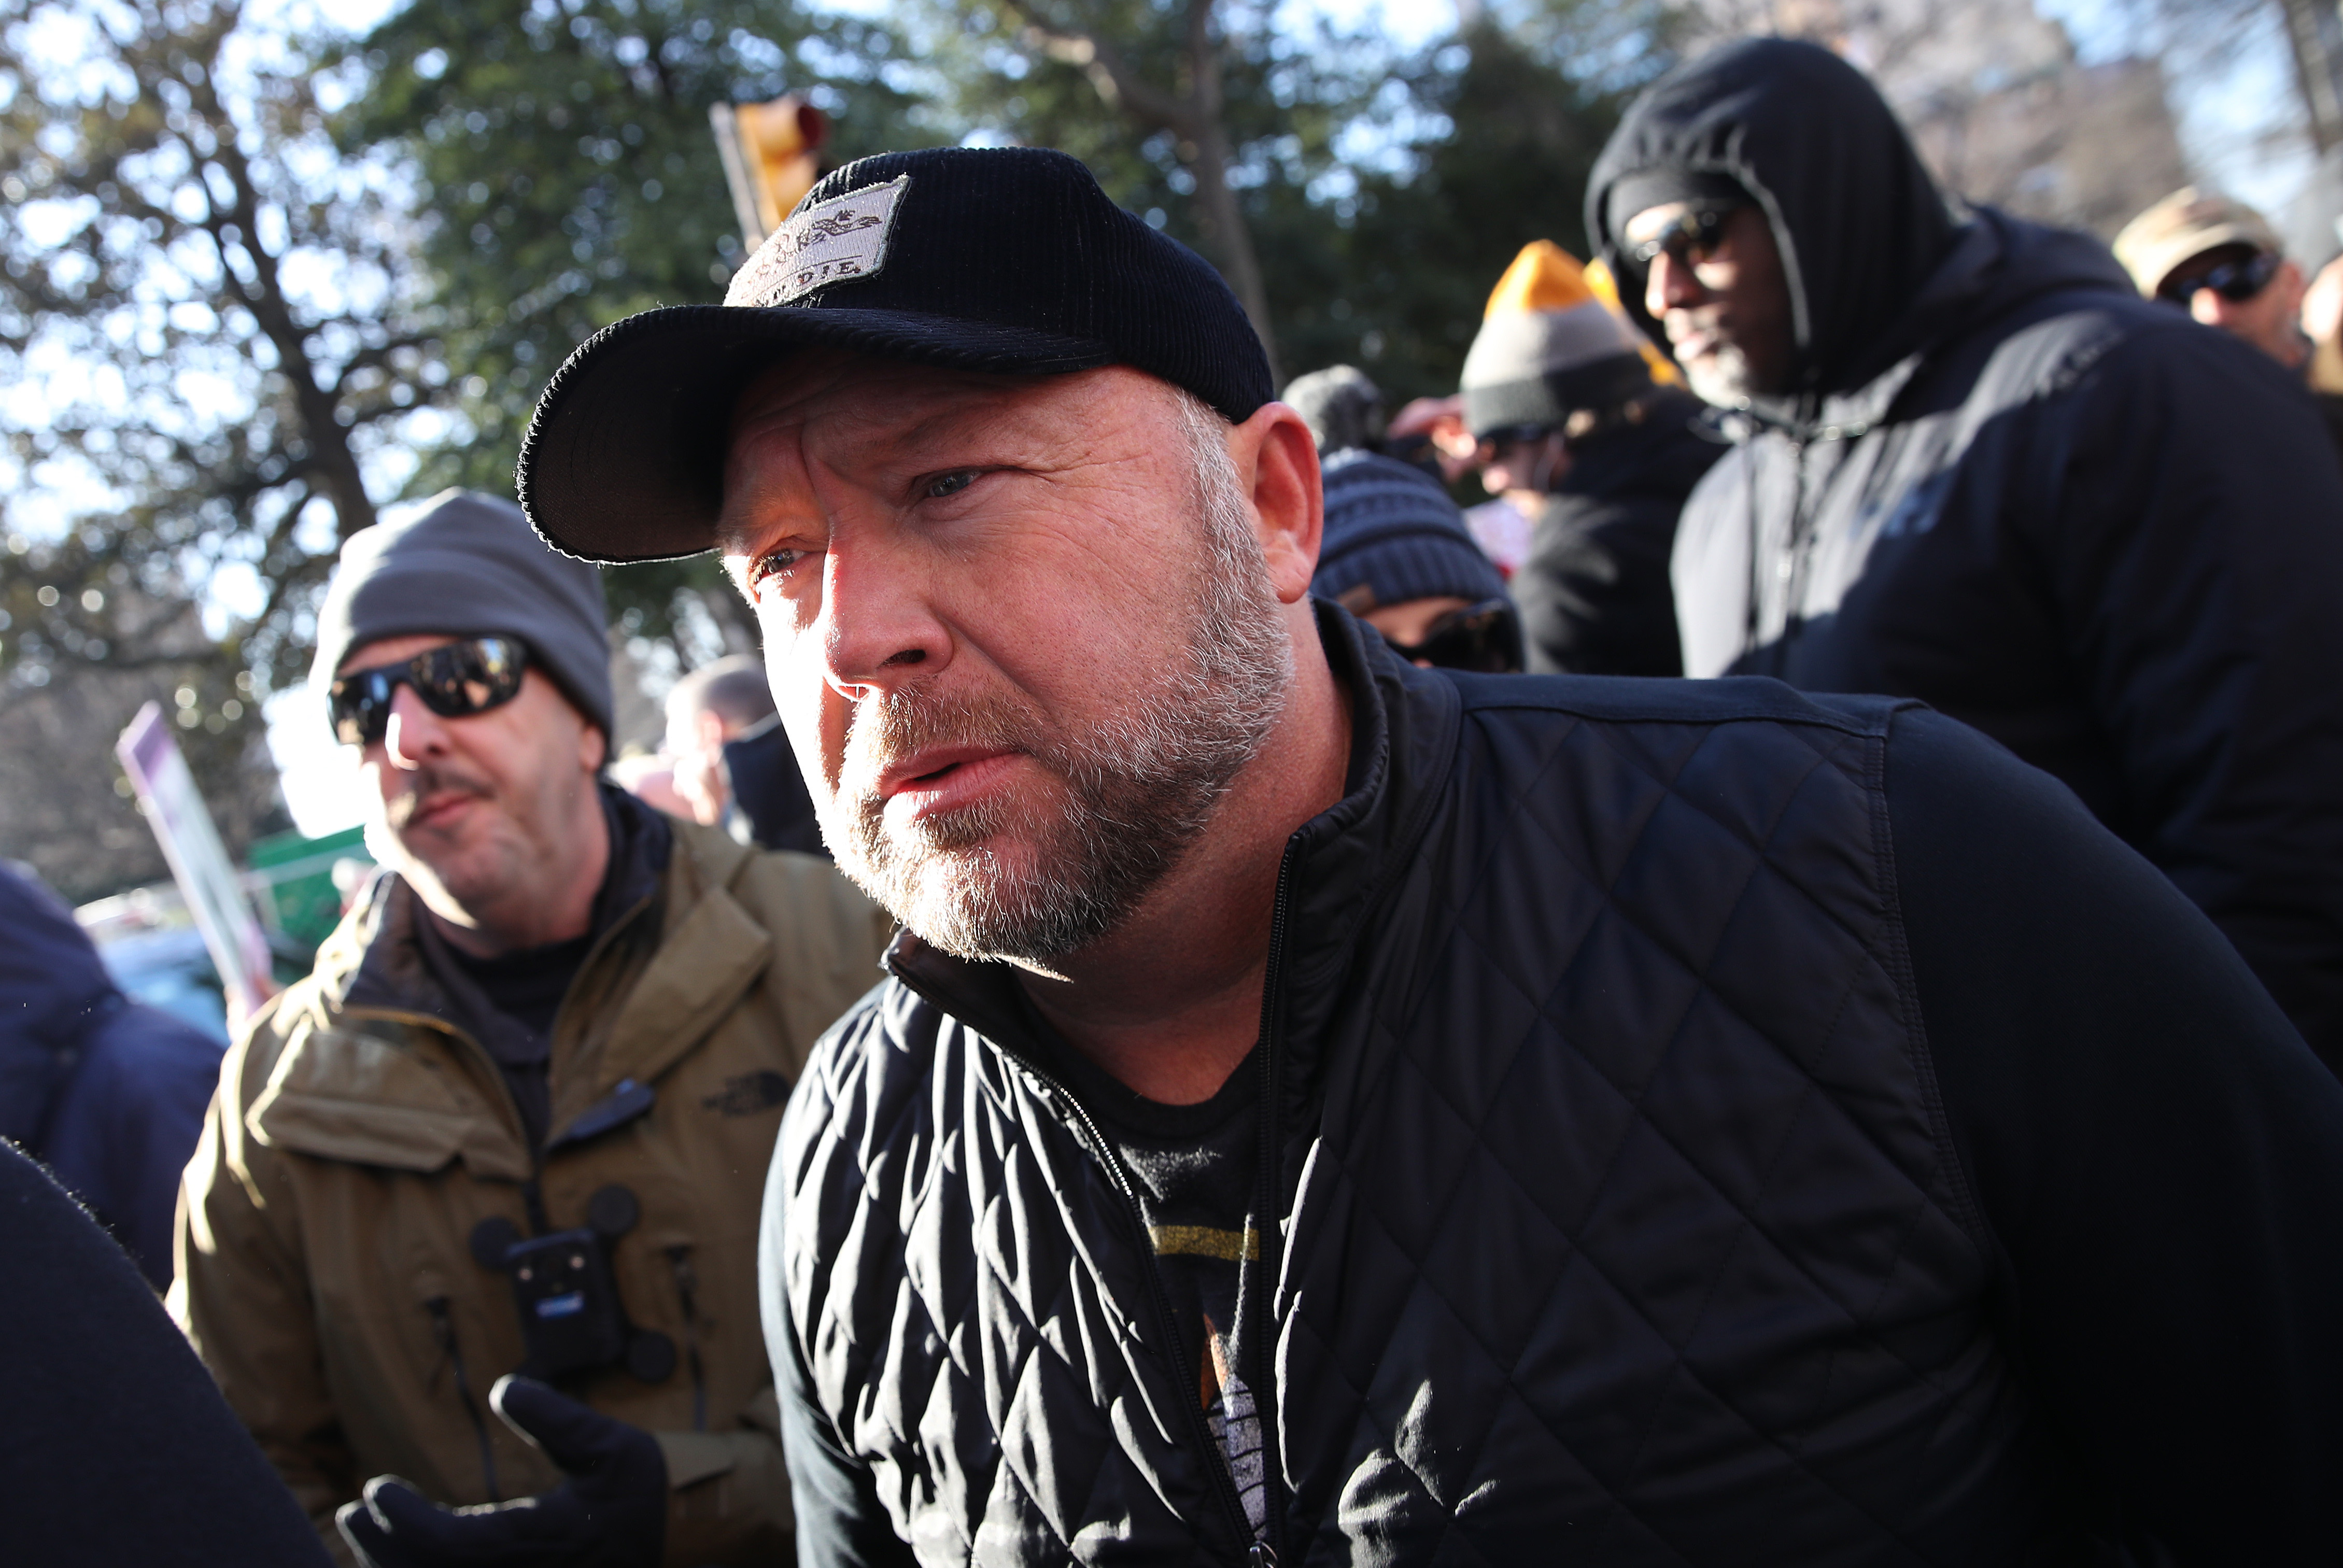 Alex Jones joins thousands of gun rights advocates attending a rally organized by The Virginia Citizens Defense League on Capitol Square near the state capitol building on January 20, 2020, in Richmond, Virginia. | Source: Getty Images